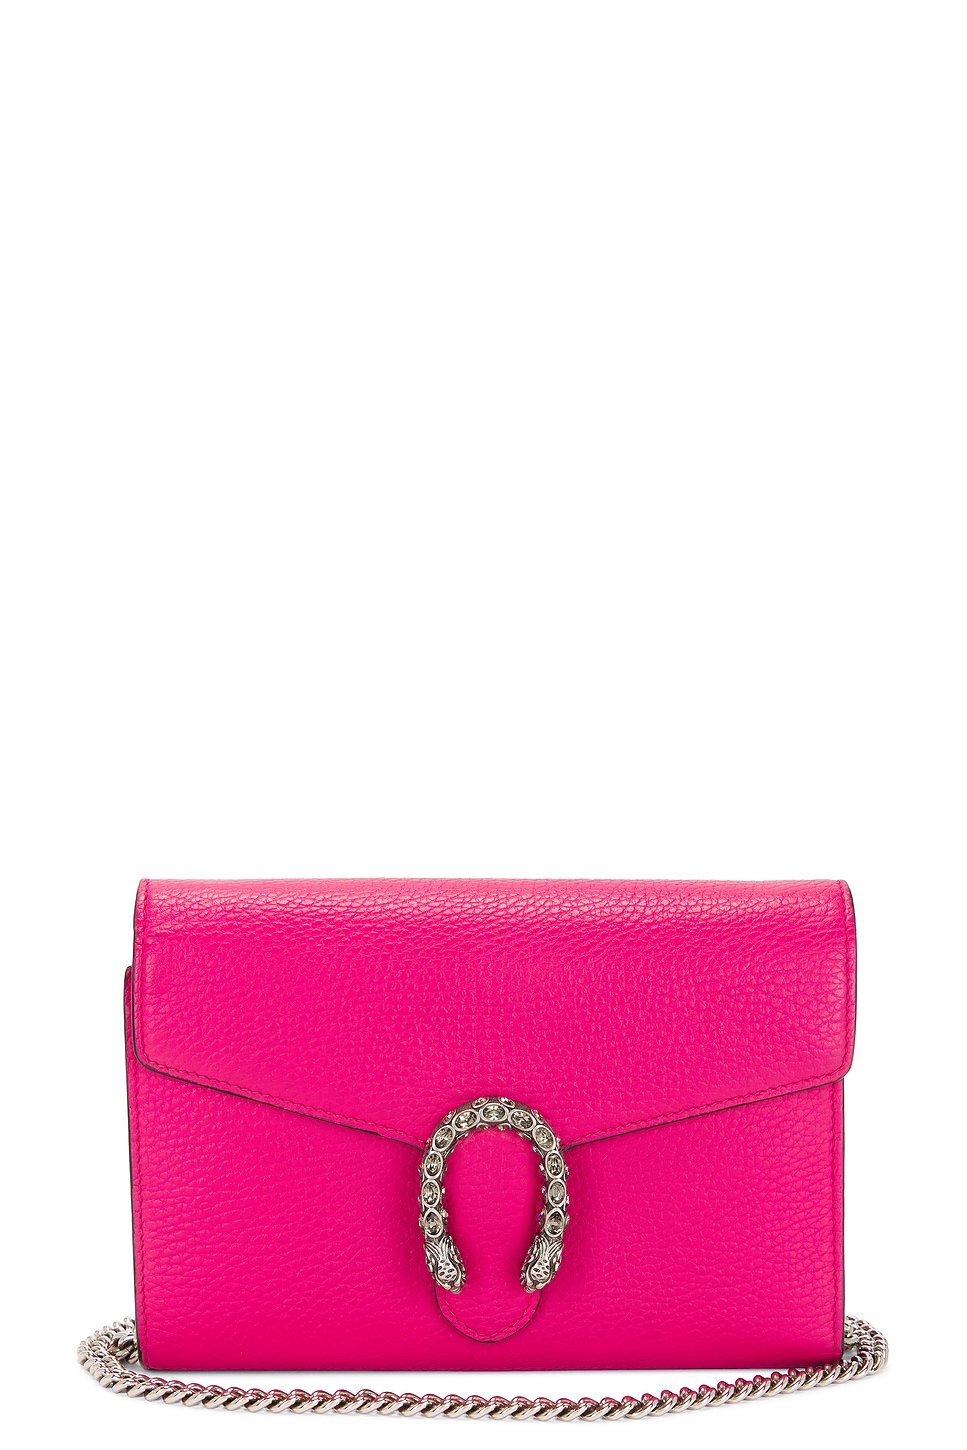 Gucci Dionysus Leather Wallet On Chain Bag In Pink